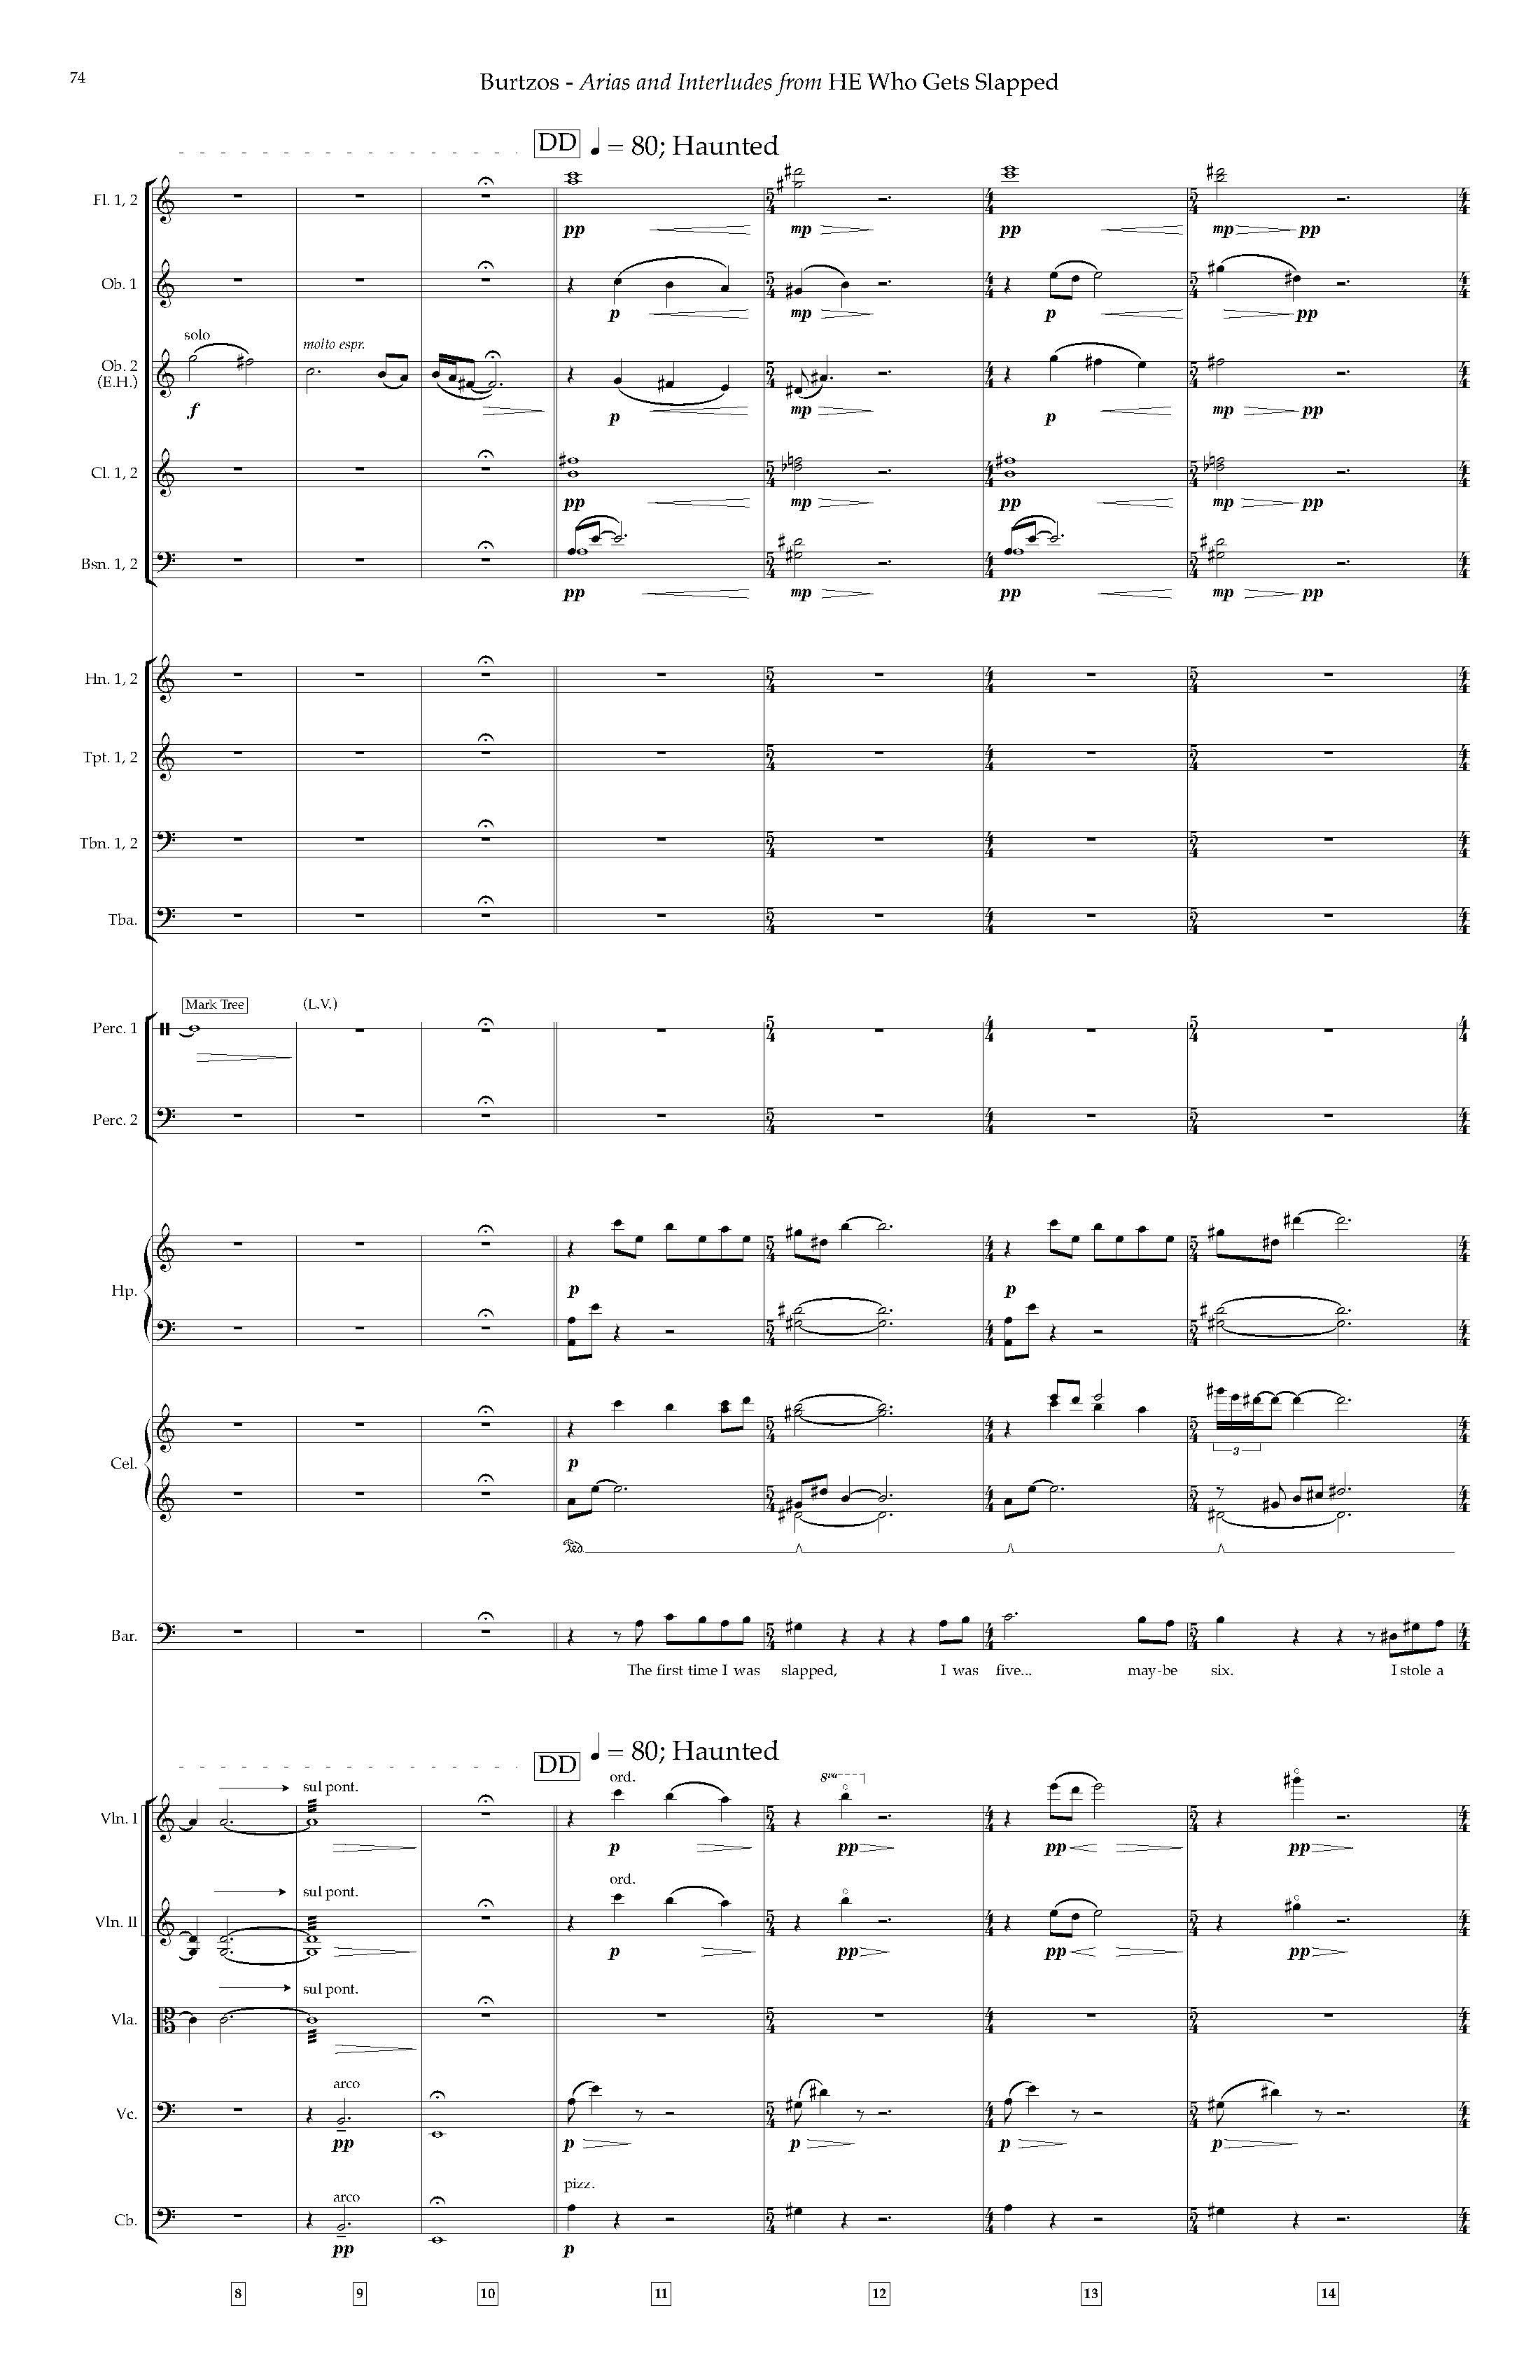 Arias and Interludes from HWGS - Complete Score_Page_80.jpg